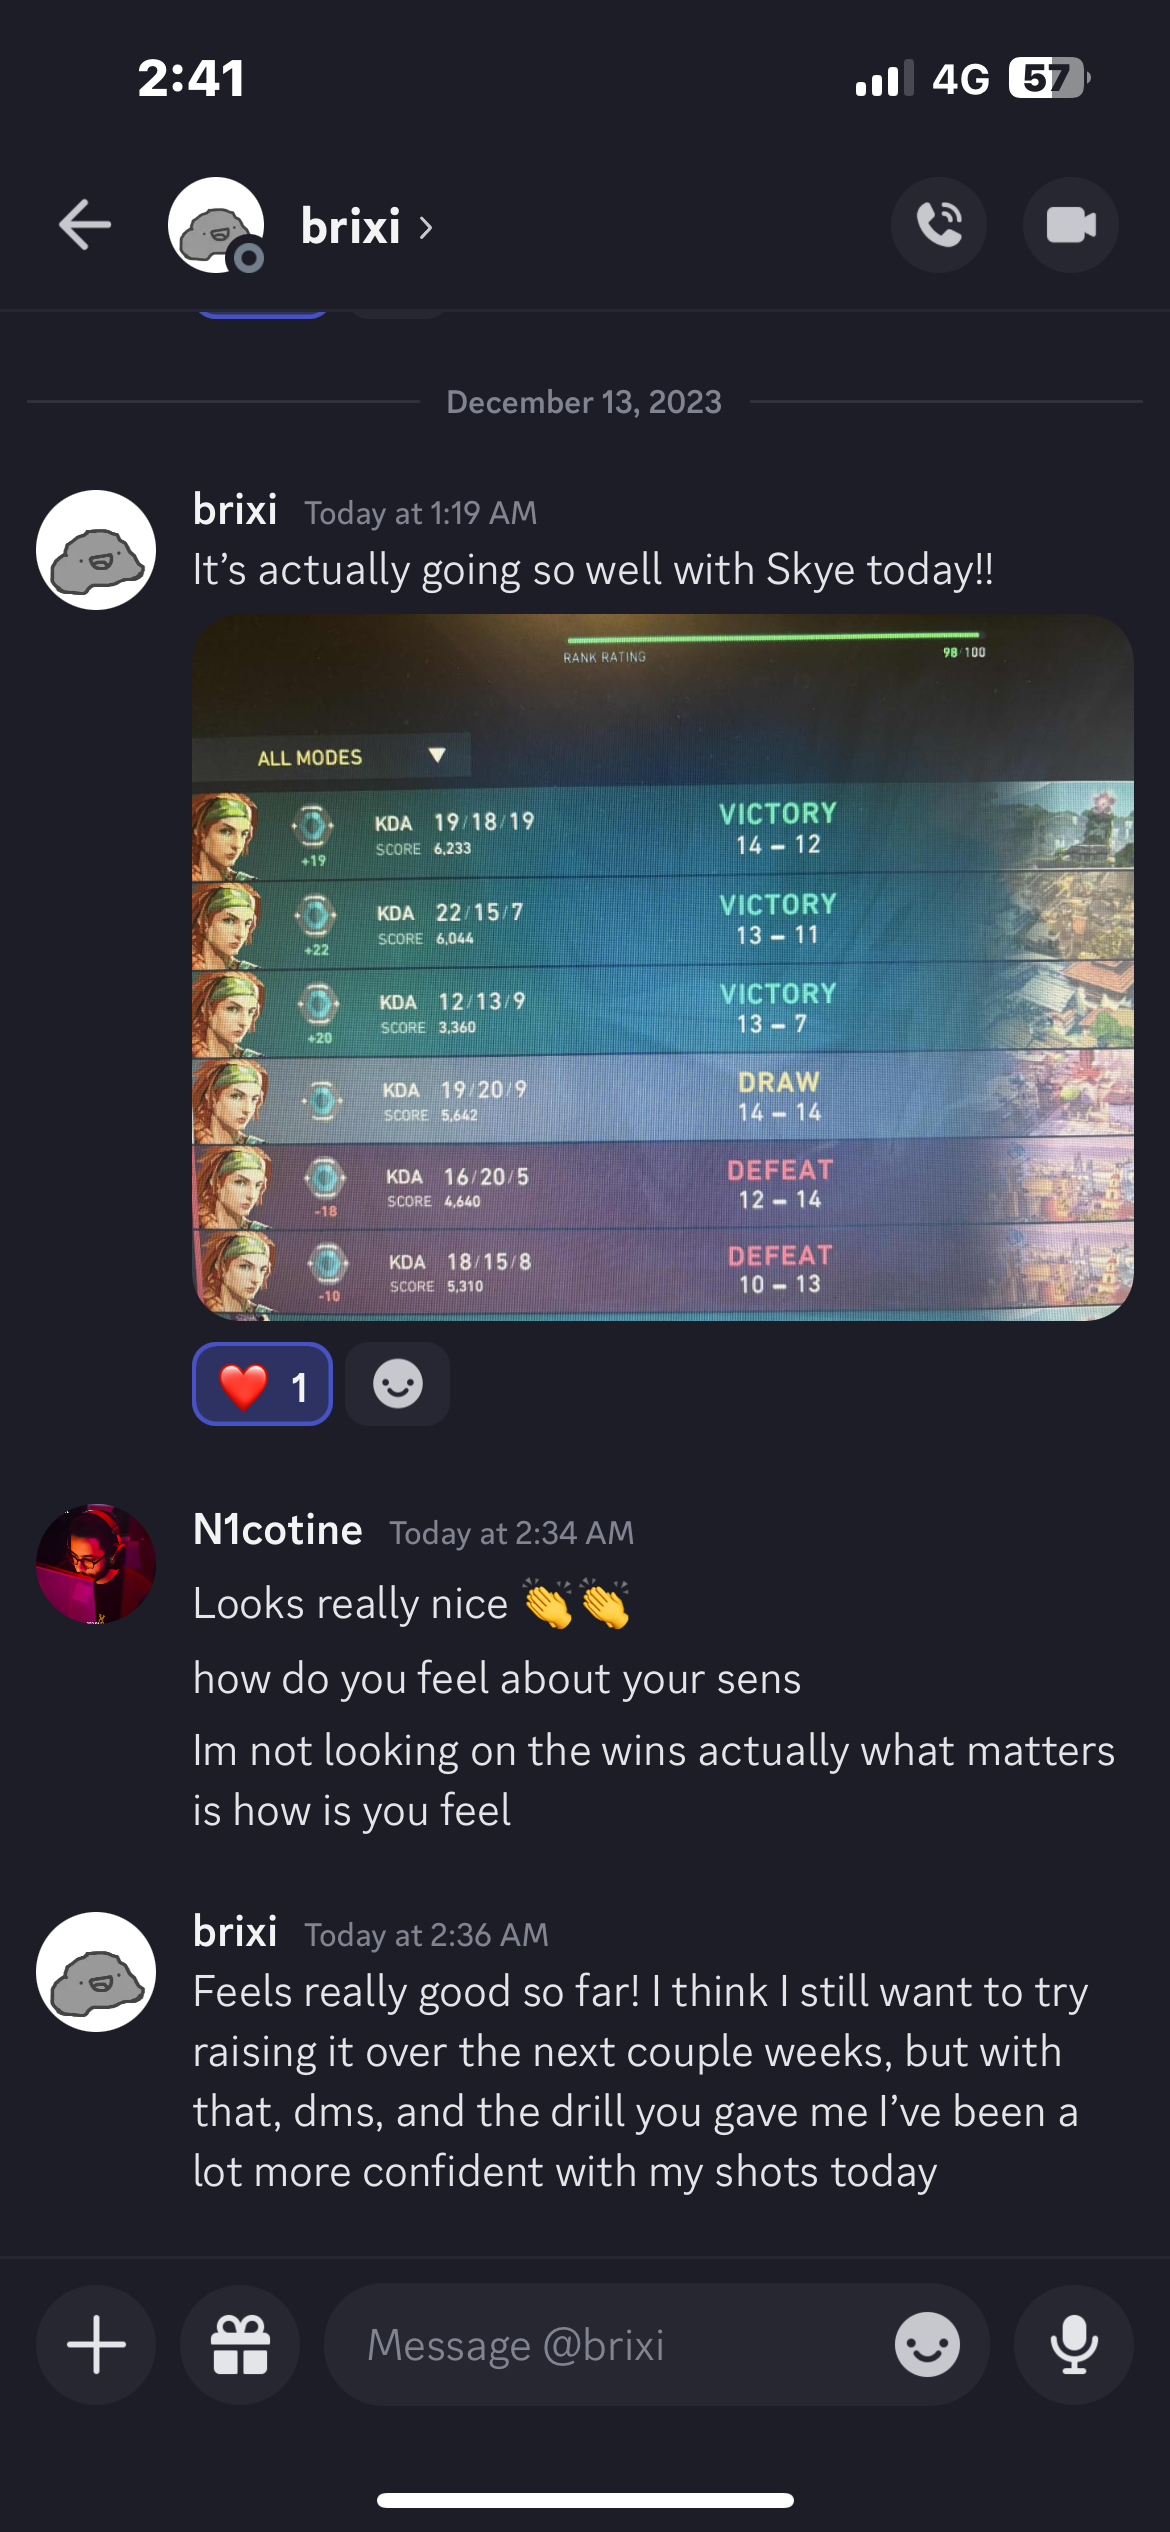 Brixi struggled with playing skye and only after 1 session she is feeling comfortable with it and fragging easily and we also had a quick aim session and with some adjustments and gave her an aim routine customized for her she is 1 tapping people , Good job girl👏👏